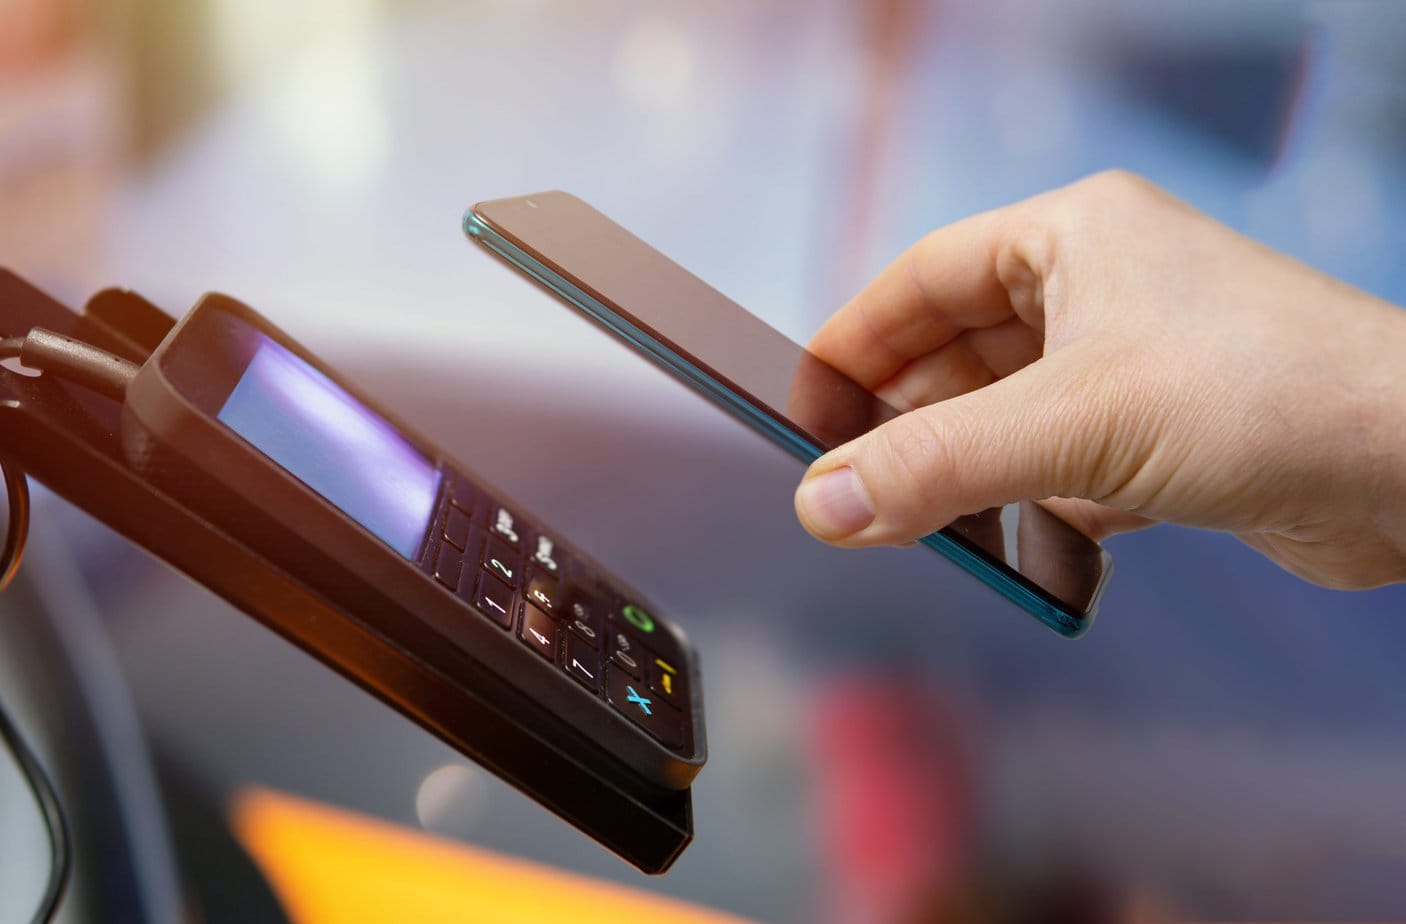 Mobile wallet transactions skyrocket to $93 billion, as 98.9% of bank interactions take place digitally 